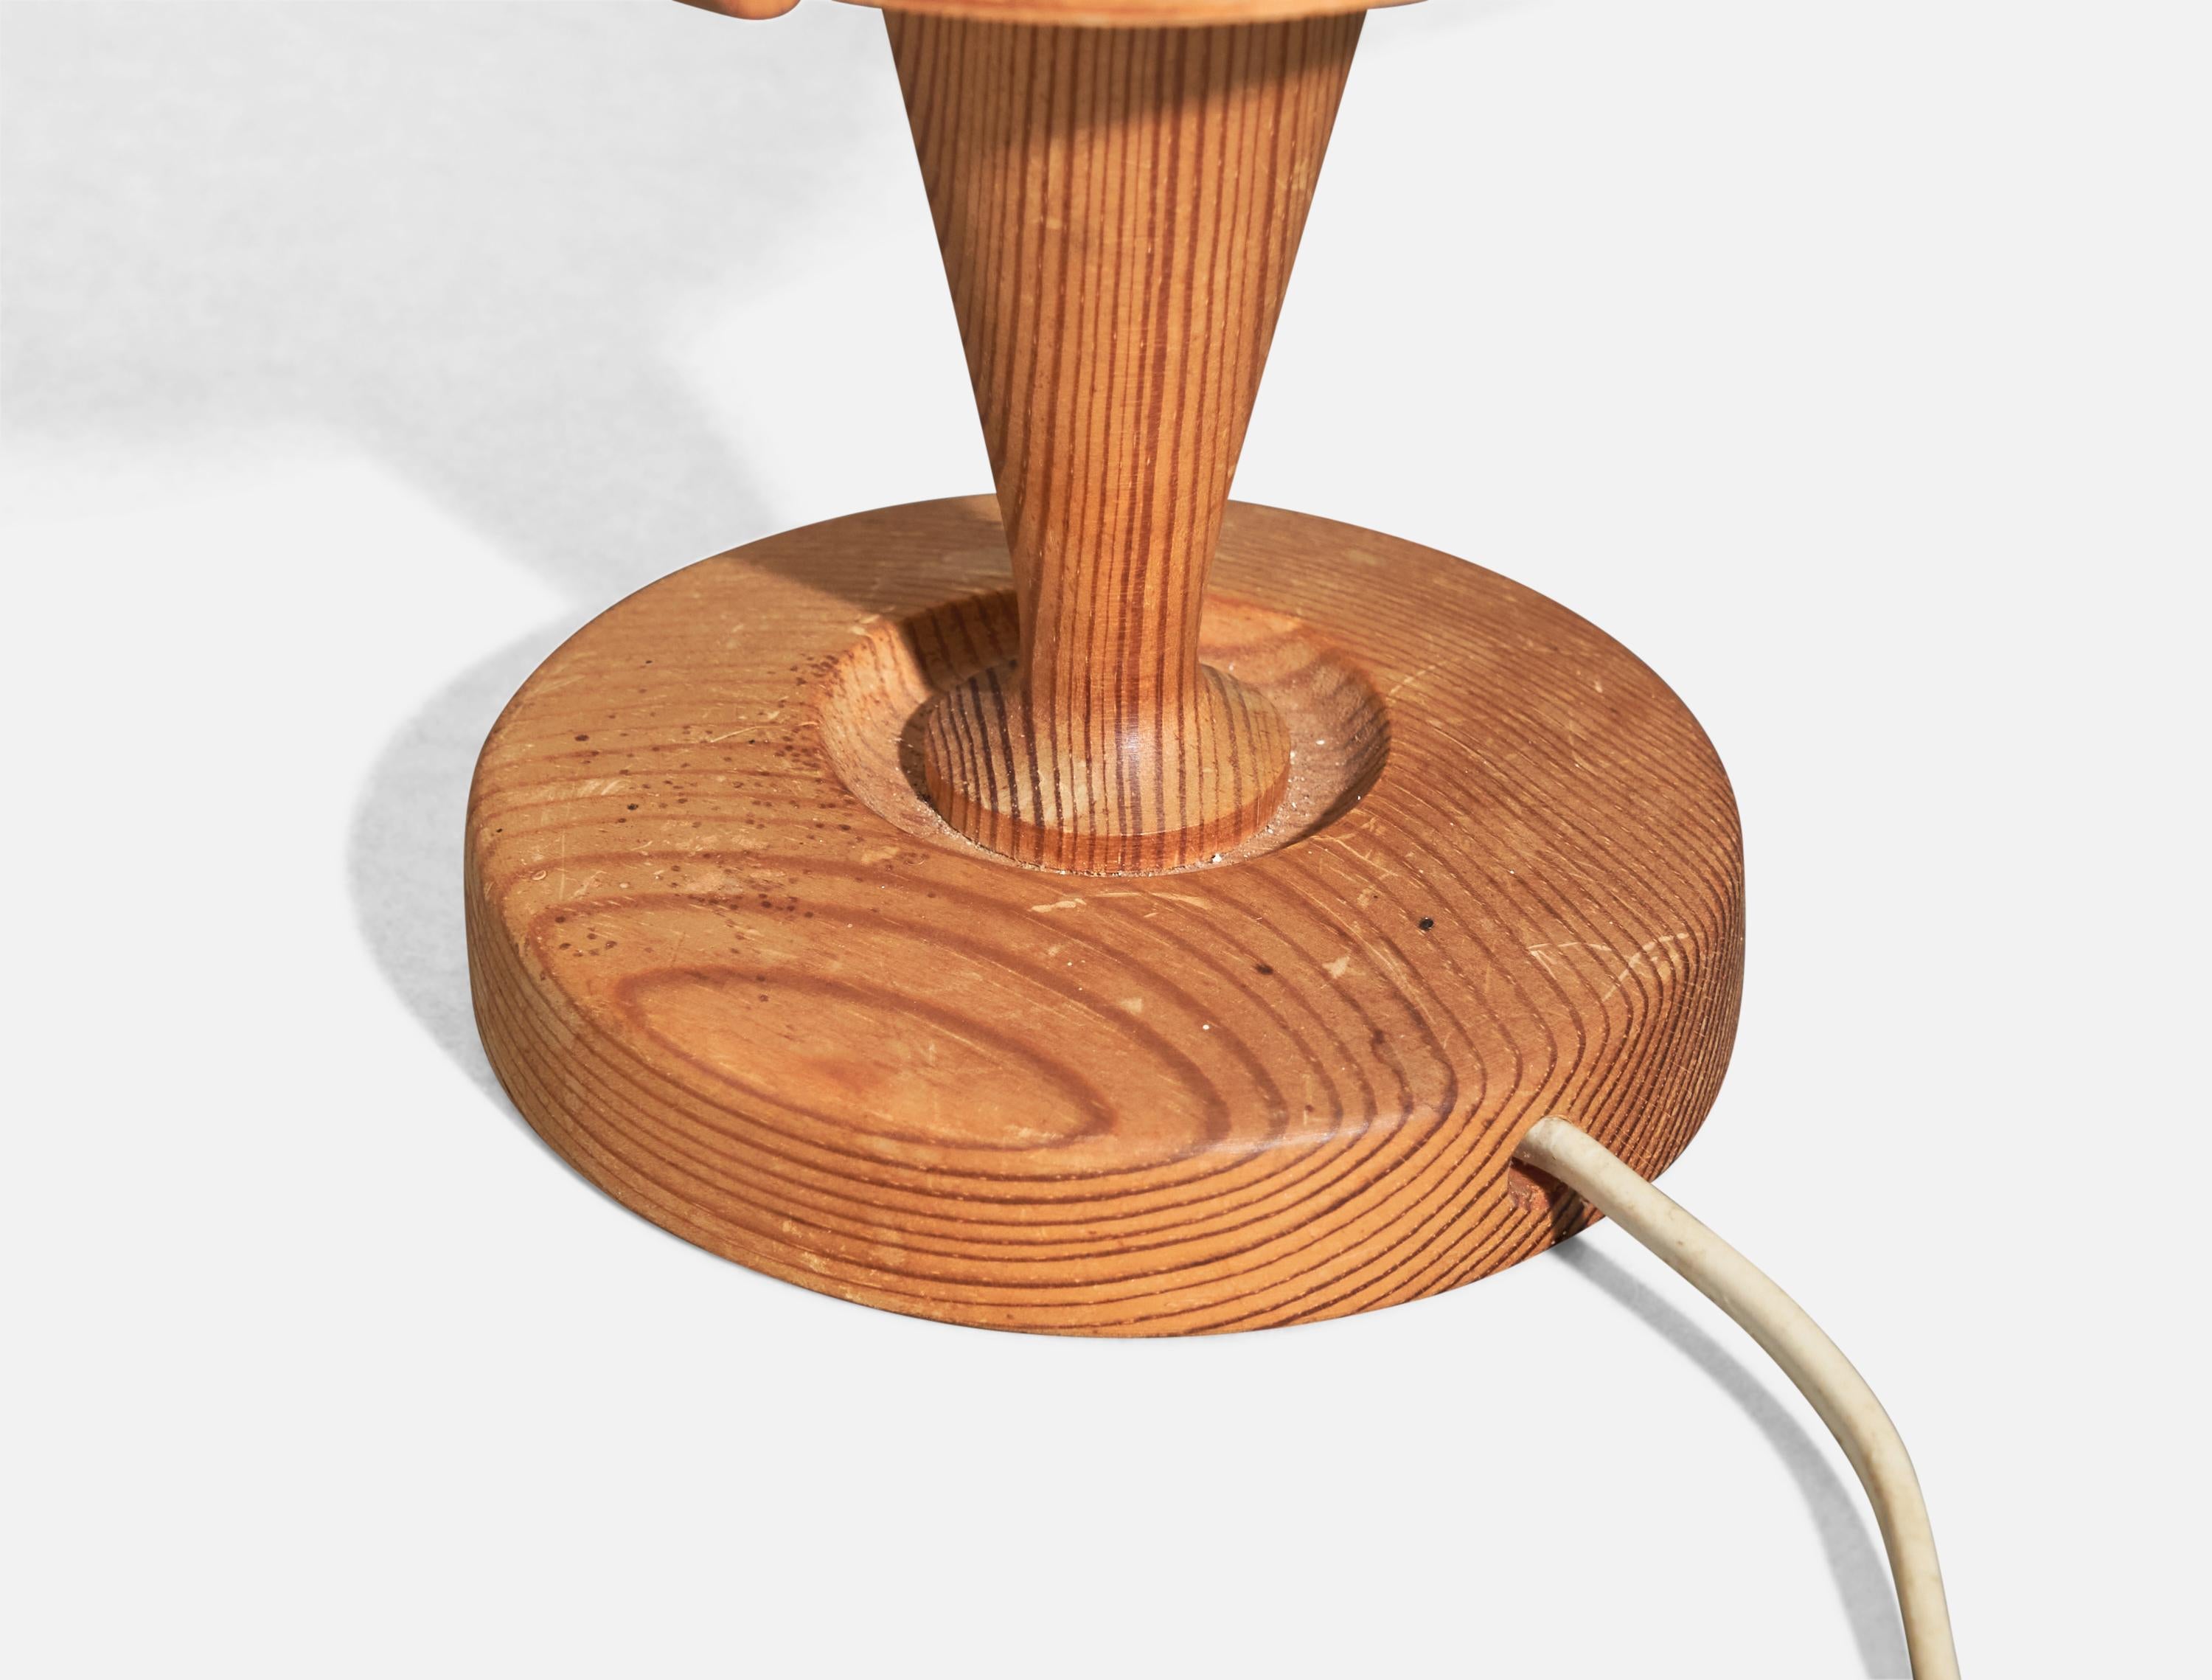 A pine and moulded pine veneer table lamp designed by Hans-Agne Jakobsson and produced by Elysett, Sweden, 1970s.

Socket takes E-14 bulb.

There is no maximum wattage stated on the fixture.